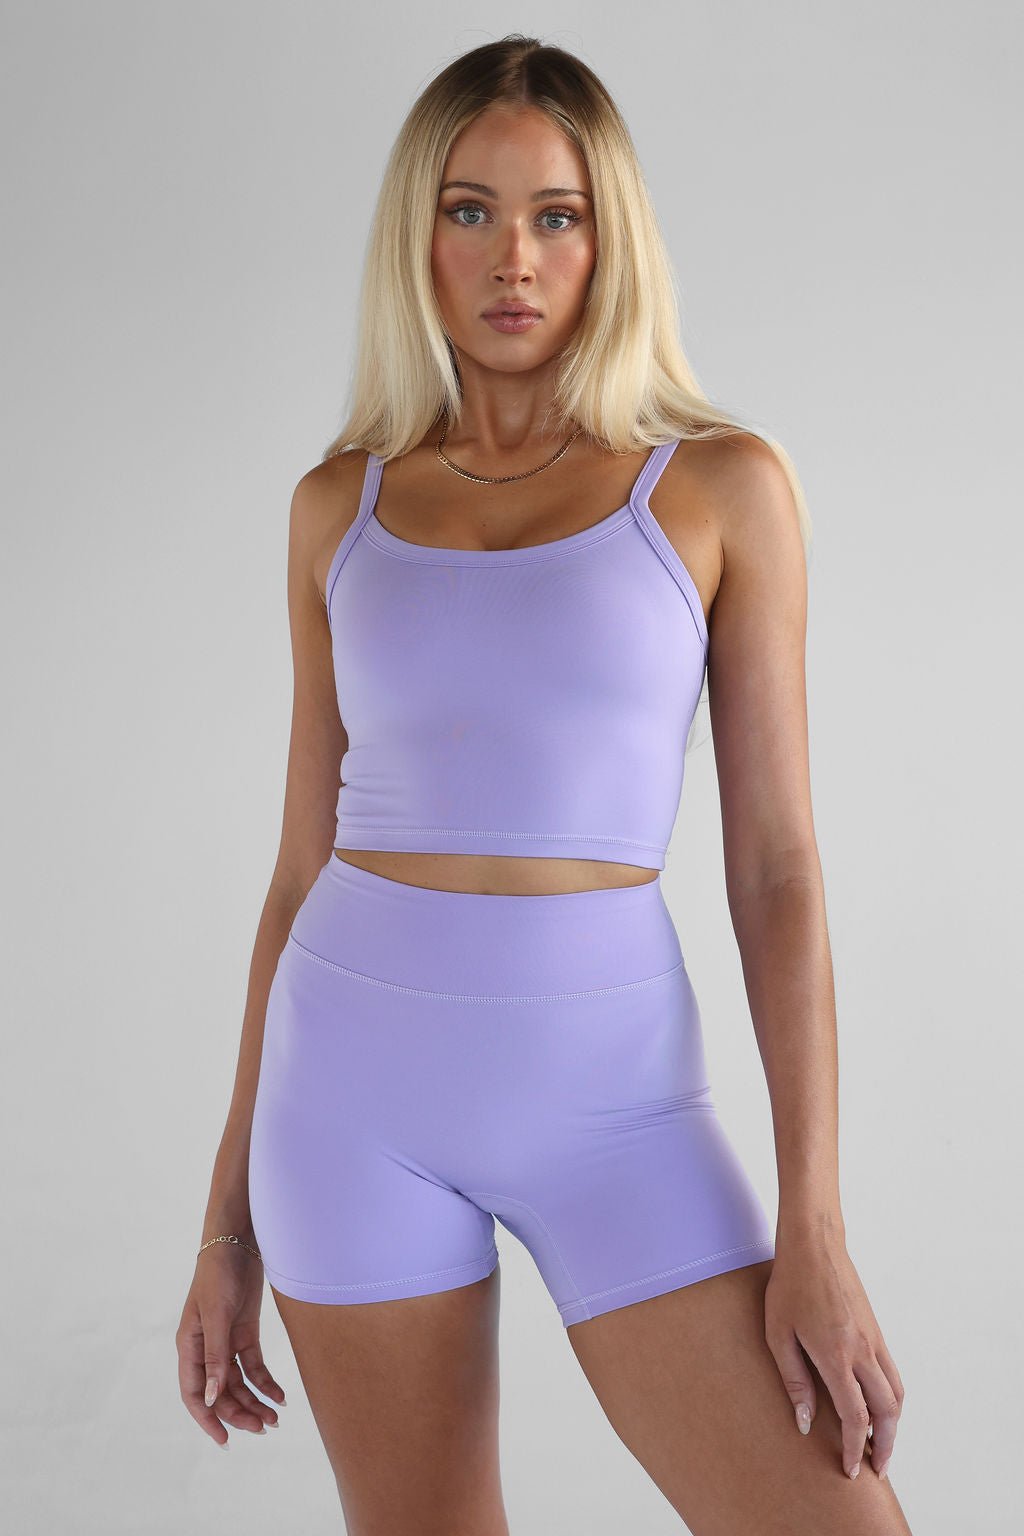 5" Signature Bike Shorts - Lilac SHIPPING FROM 12/02 - LEELO ACTIVE